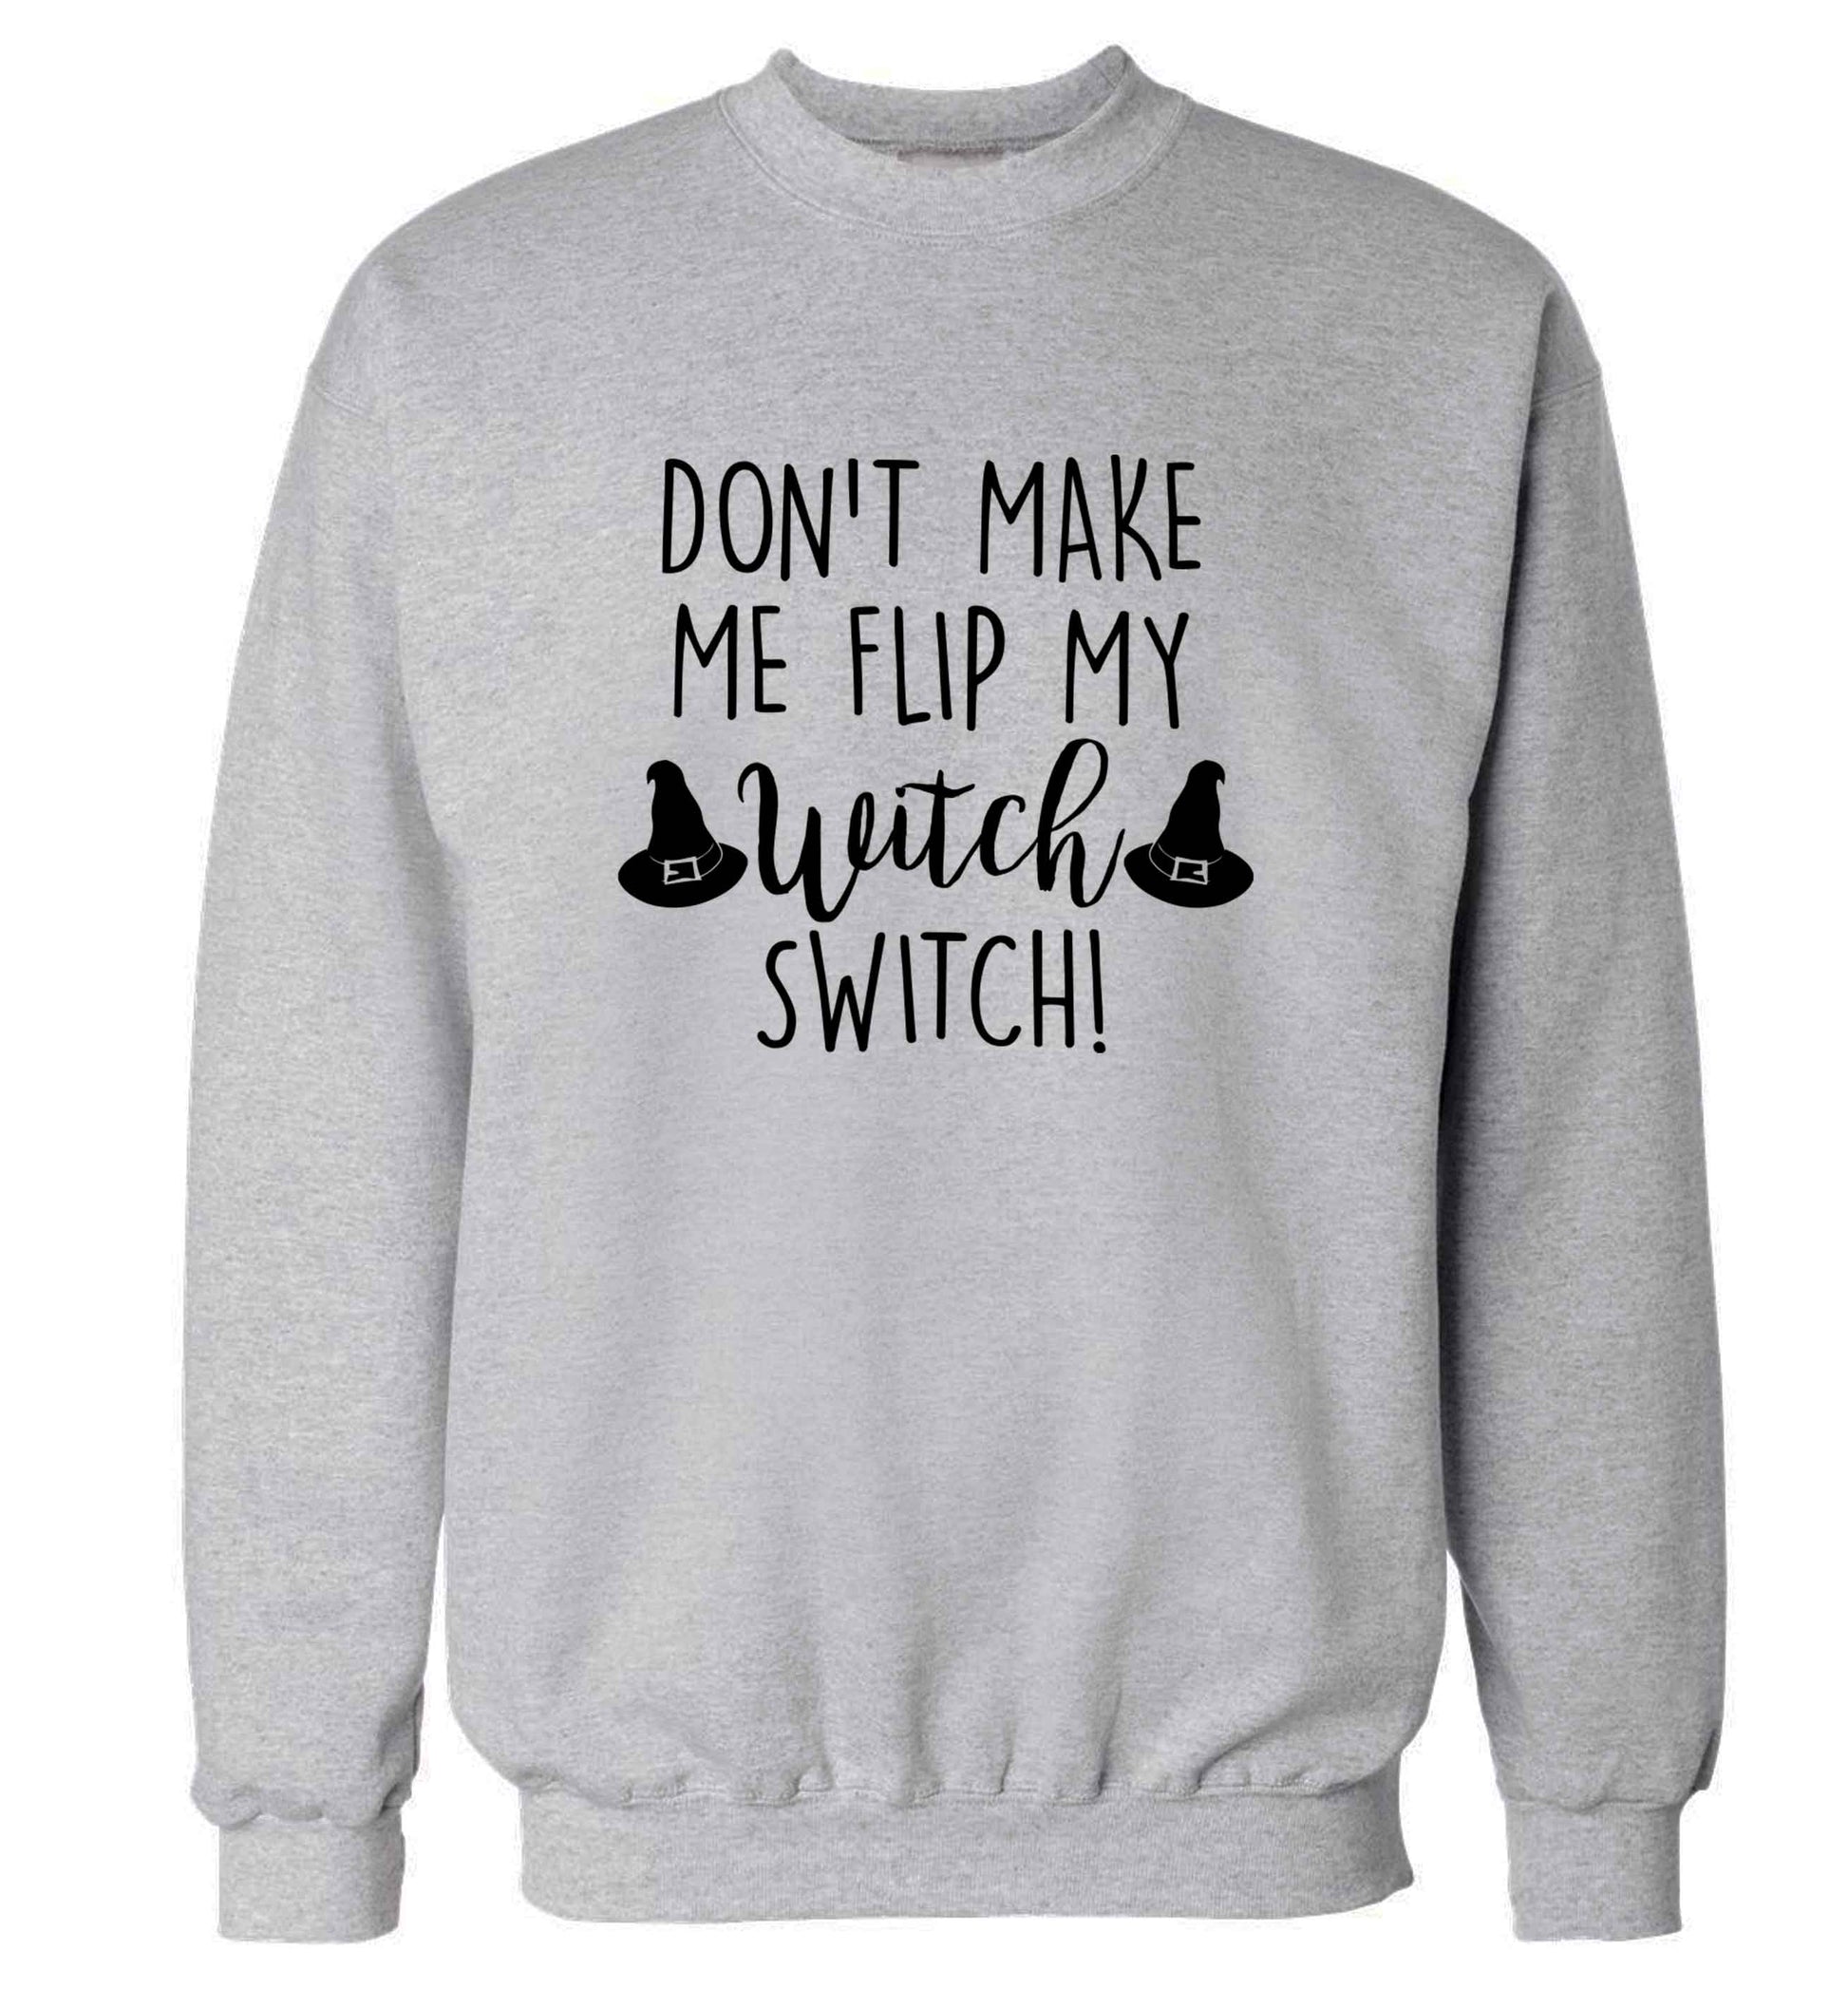 Don't make me flip my witch switch adult's unisex grey sweater 2XL